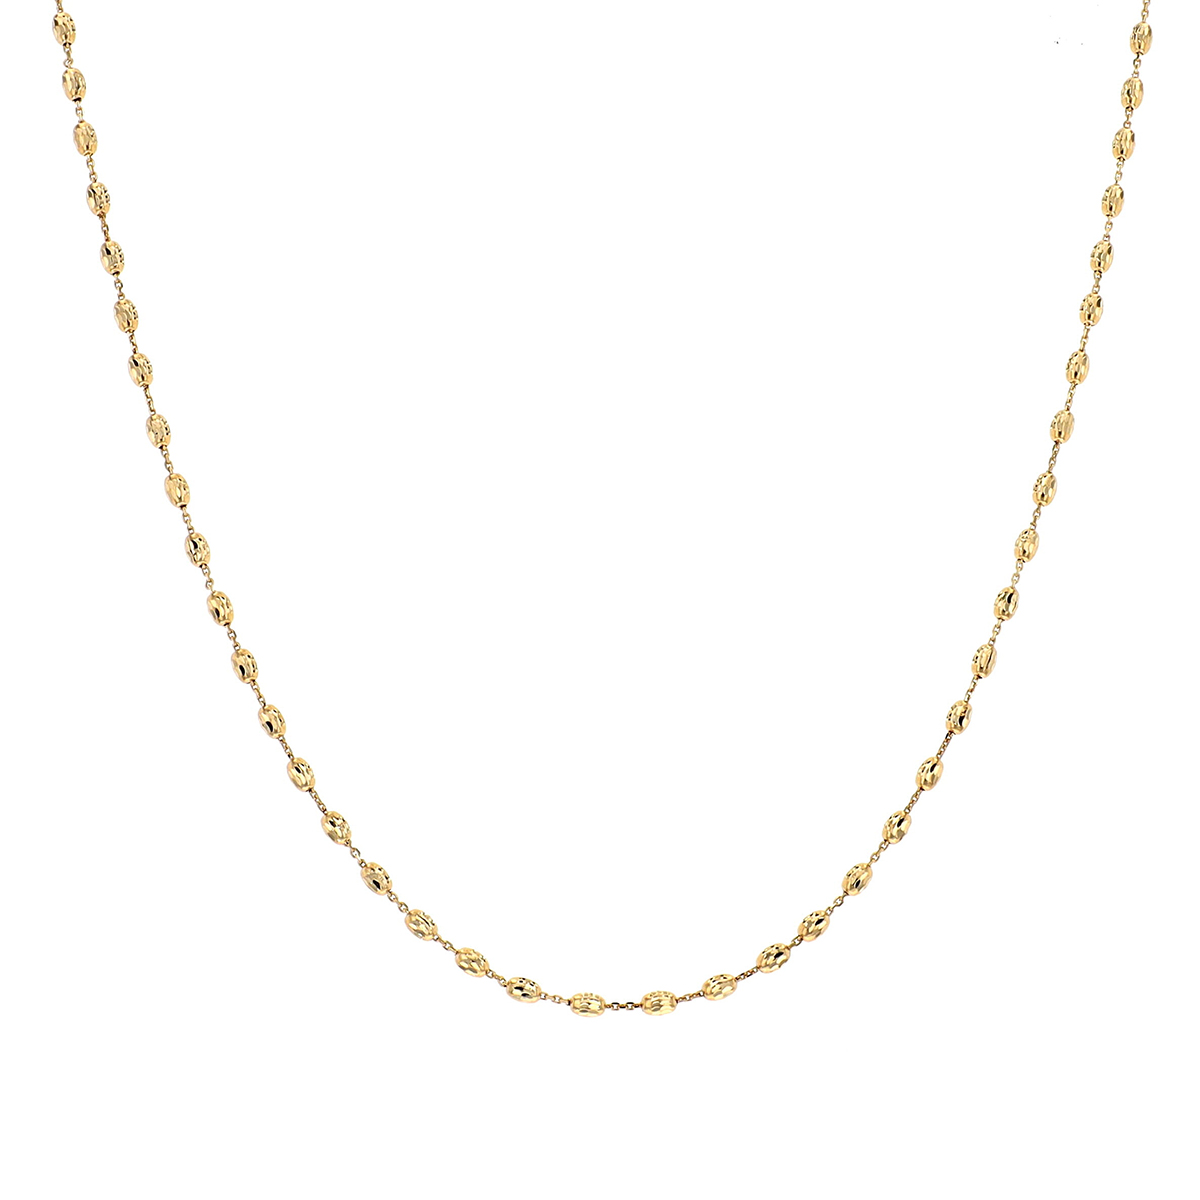 18K Yellow Gold Station Necklace